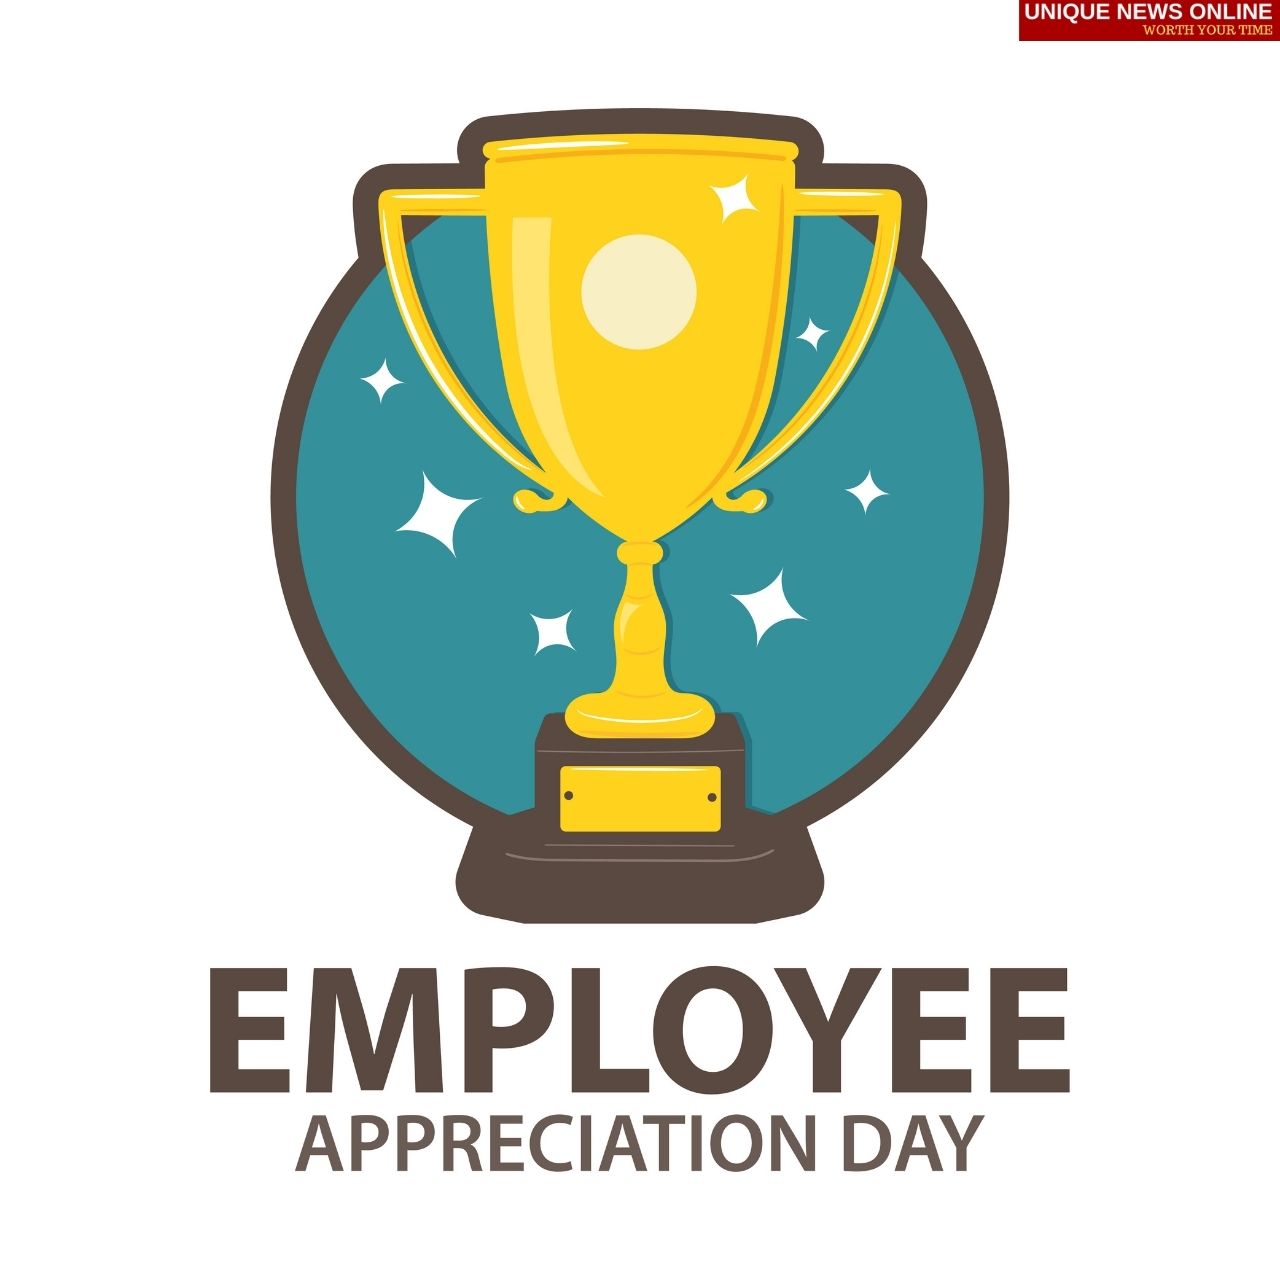 Employee Appreciation Day (USA) 2022 Quotes, Messages, Wishes, Greetings, Sayings to Share